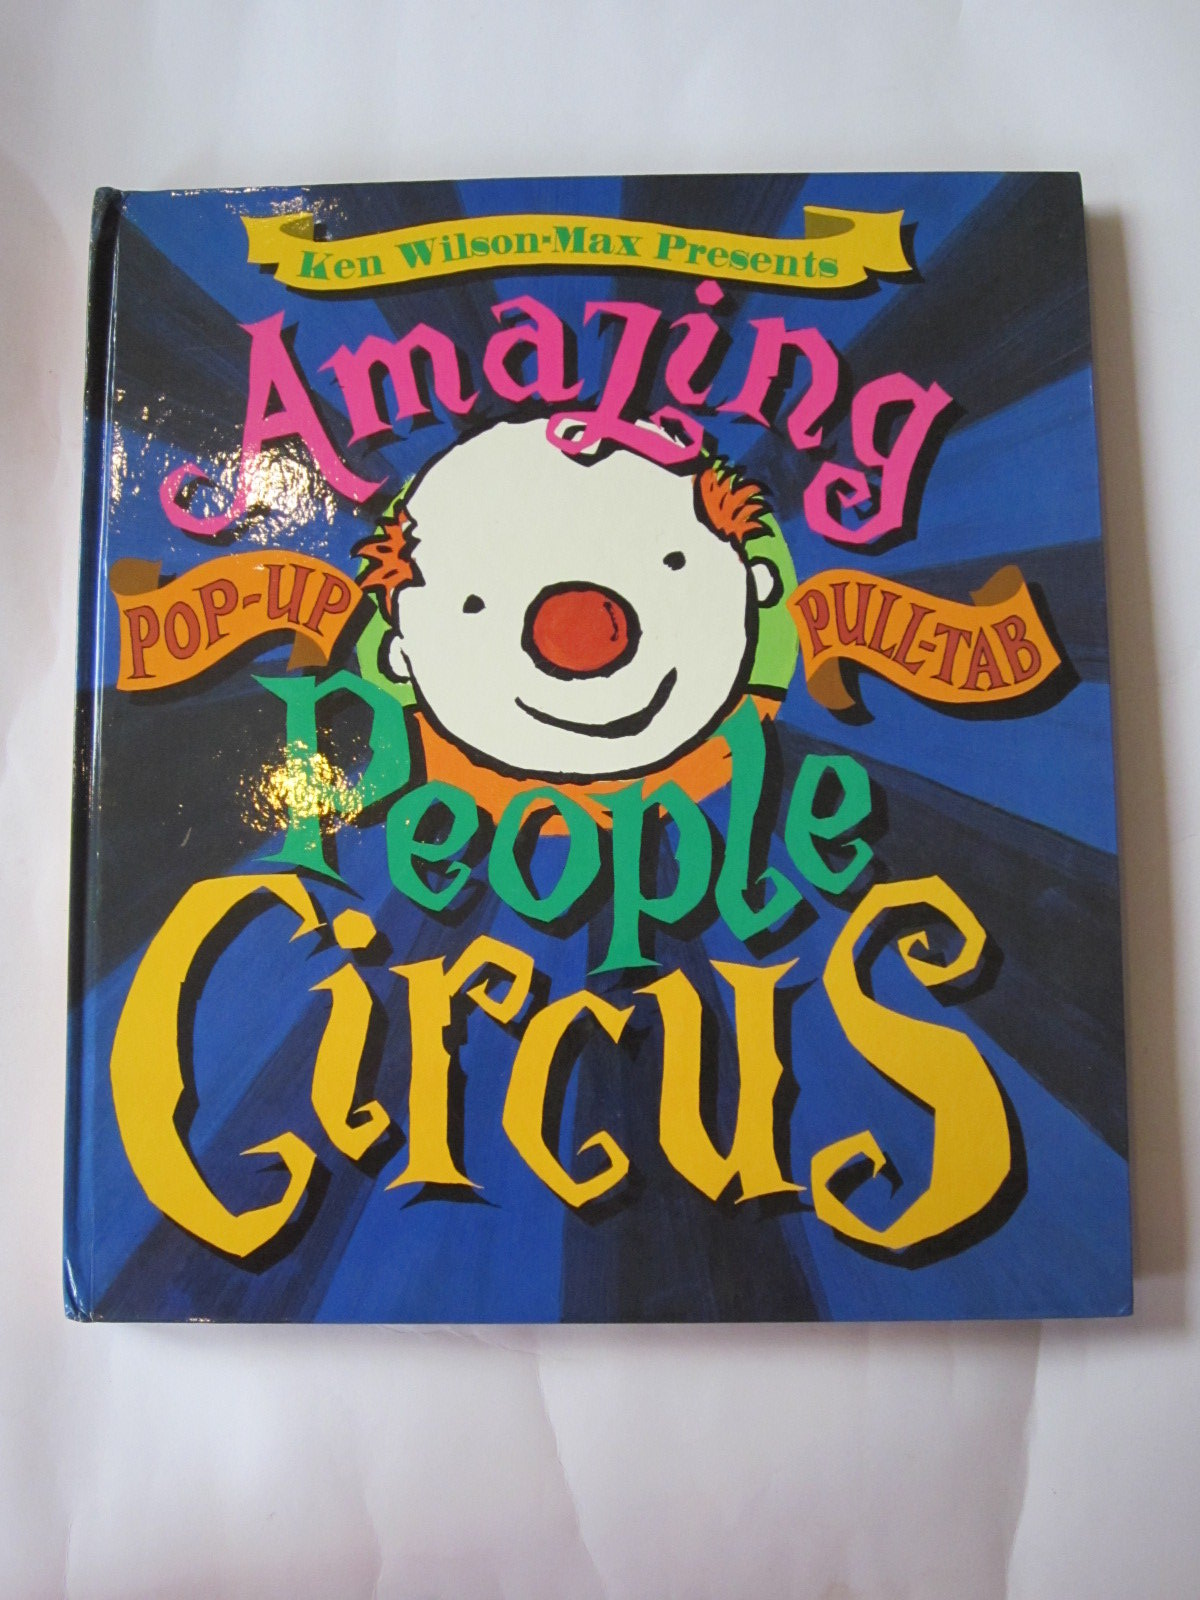 Photo of THE AMAZING PEOPLE CIRCUS written by Wilson-Max, Ken illustrated by Wilson-Max, Ken published by David Bennett Books Ltd. (STOCK CODE: 1308056)  for sale by Stella & Rose's Books